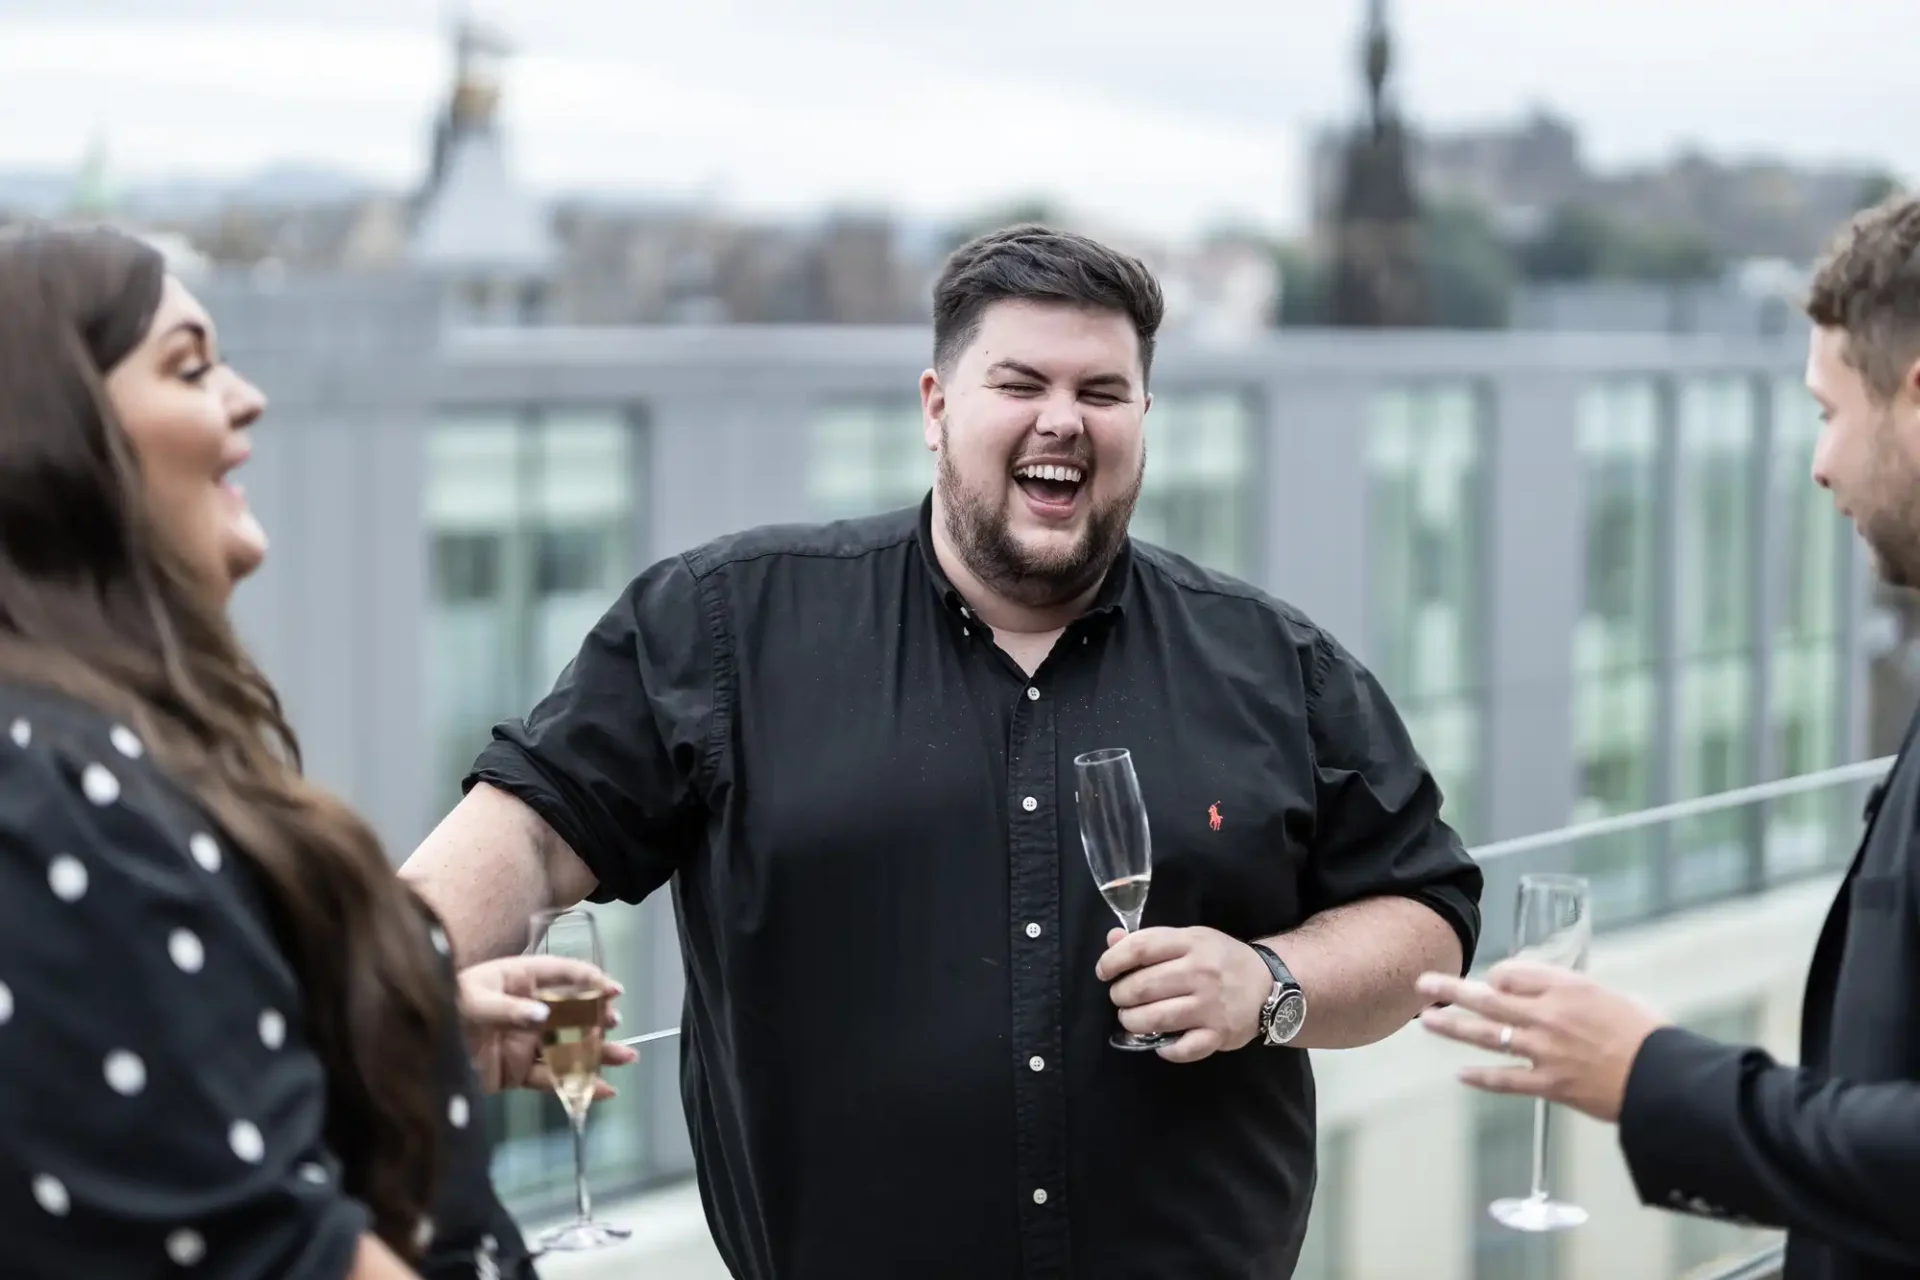 A man laughs joyously holding a glass of champagne, standing with friends on a rooftop, cityscape in the background.